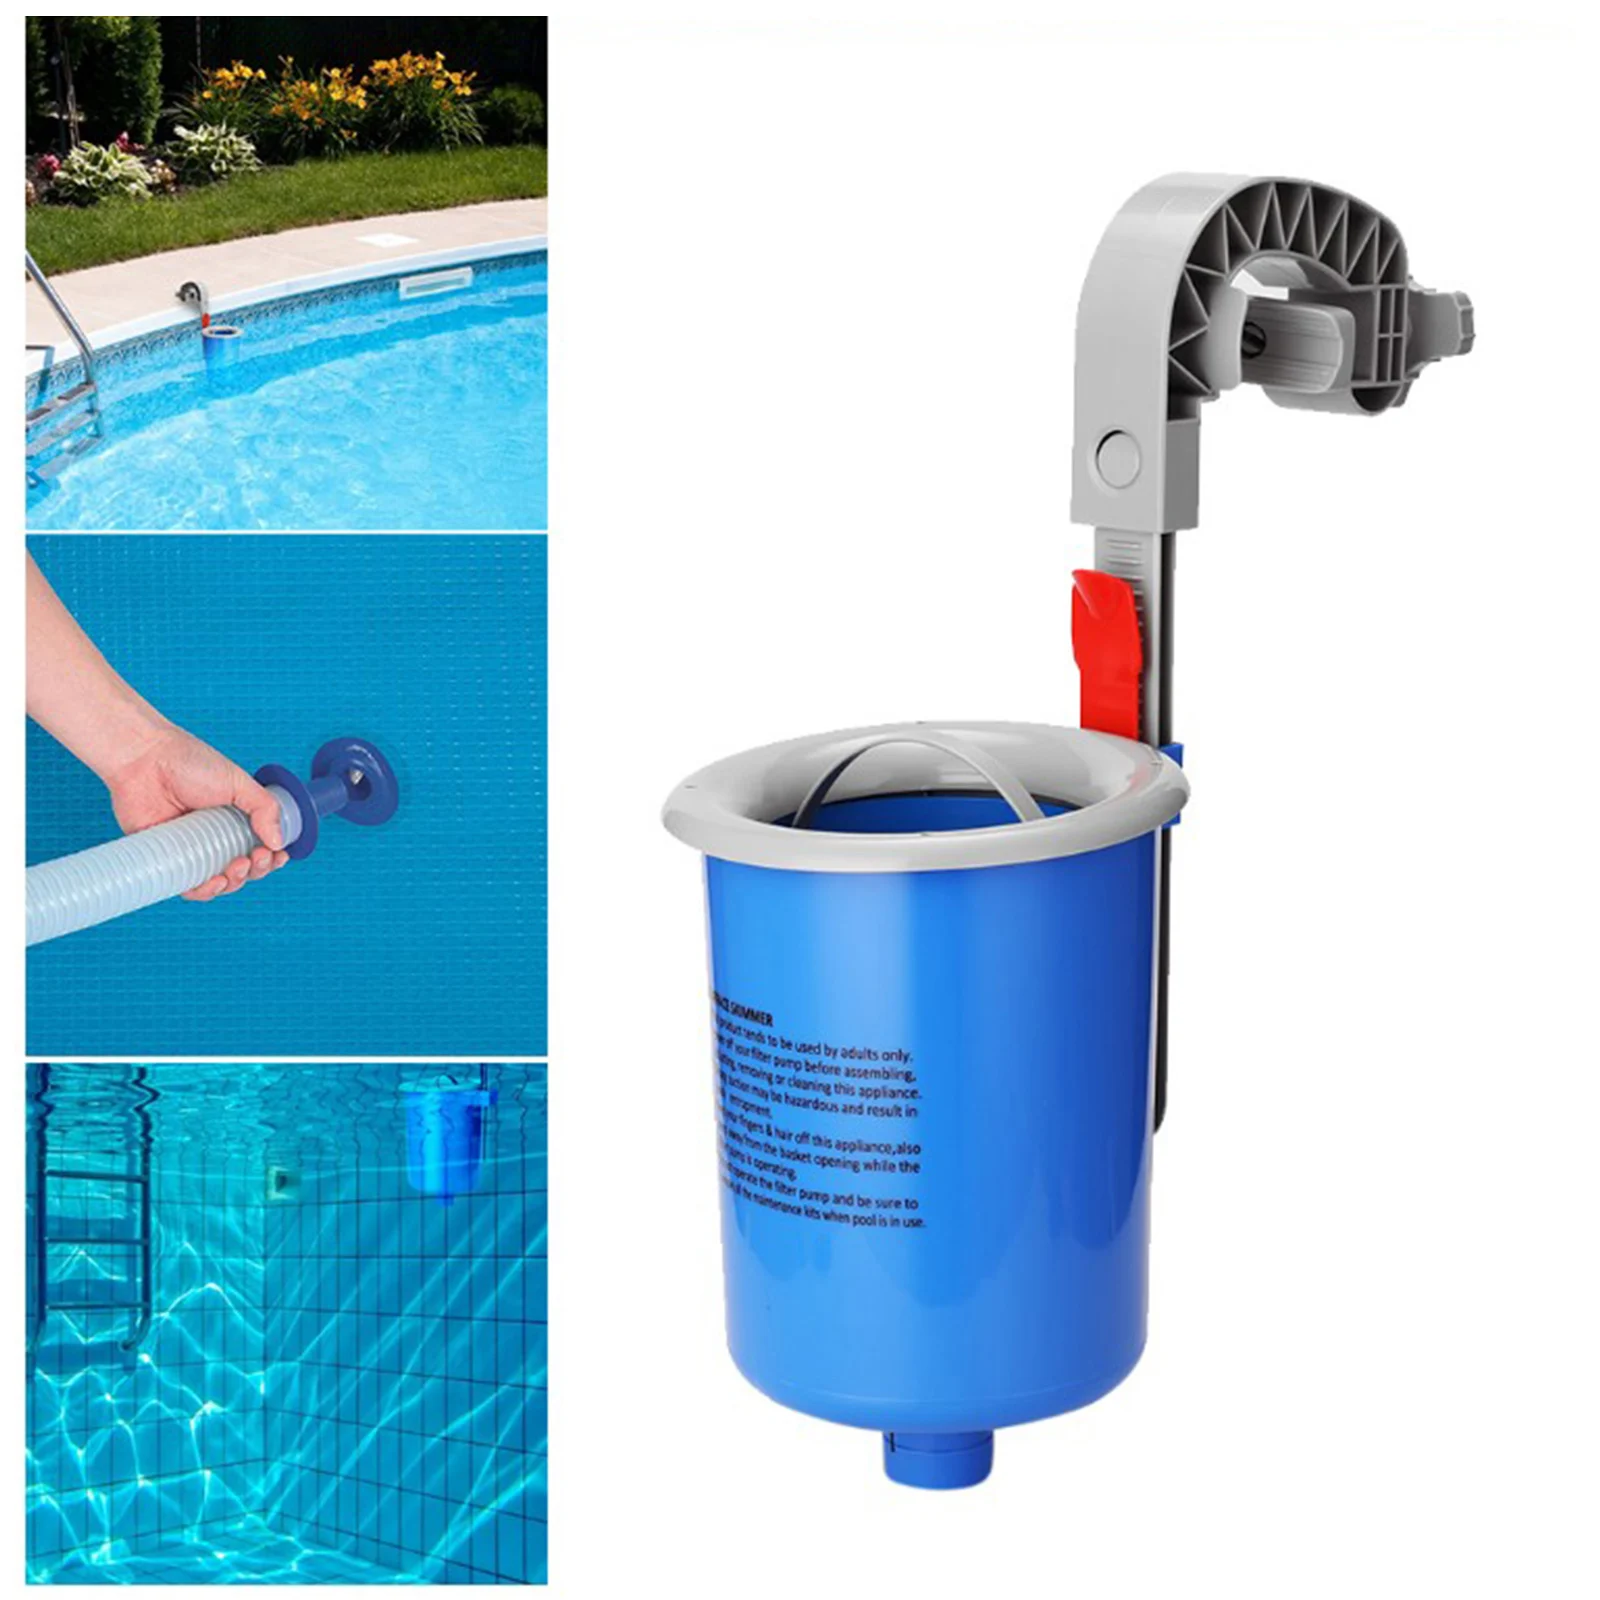 Wall-Mounted Swimming Pool Skimmer Surface Floater Debris Cleaner for Cleaning